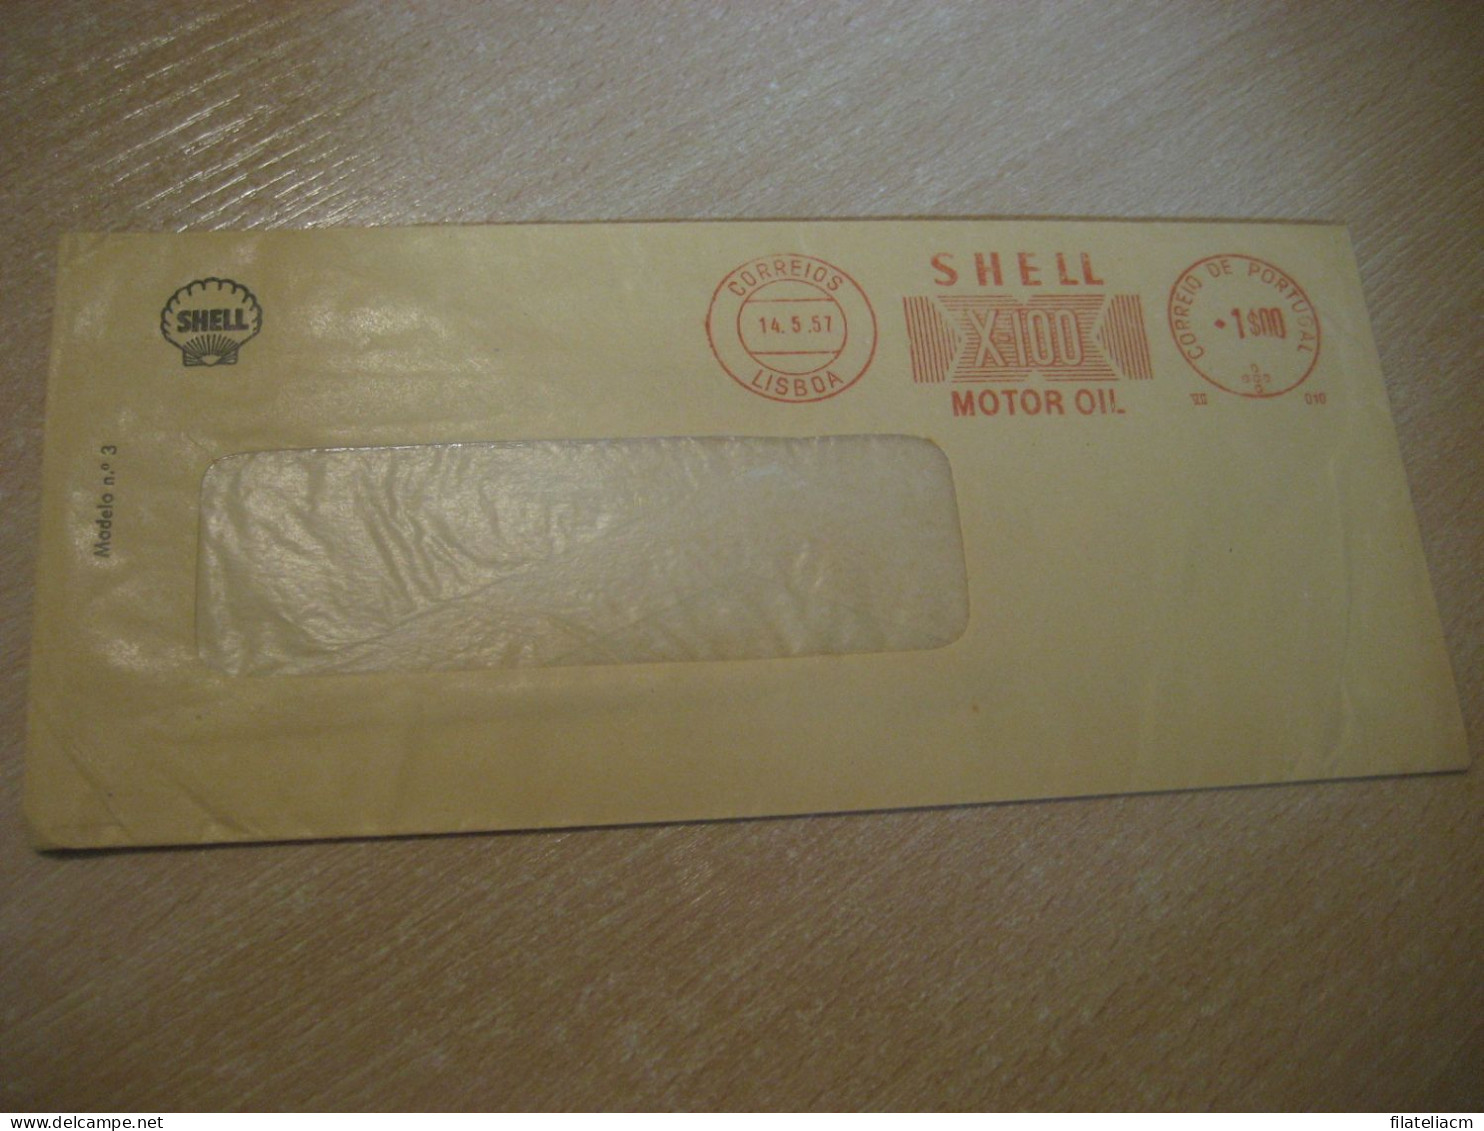 LISBOA 1957 Shell X-100 Motor Oil Meter Mail Cancel Cover PORTUGAL - Covers & Documents